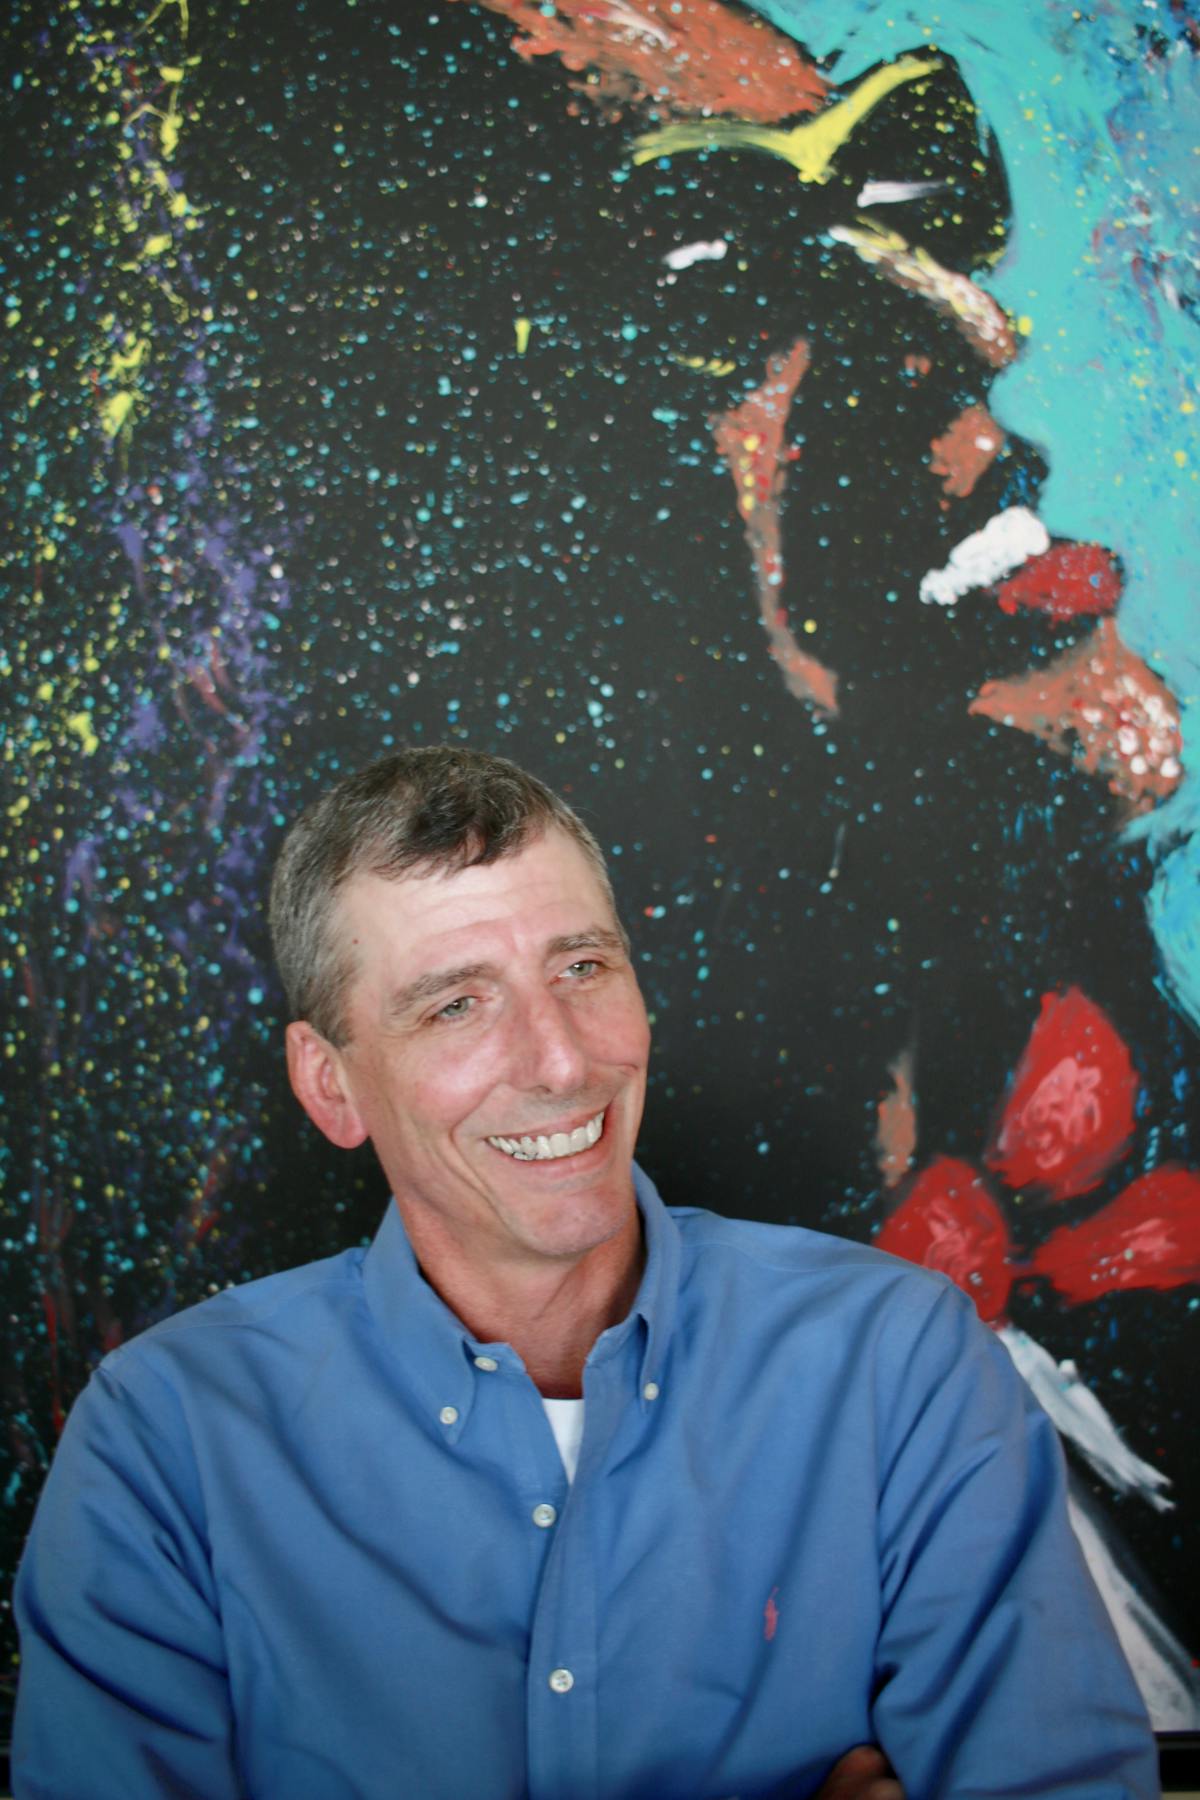 a man in a blue shirt smiling for the camera